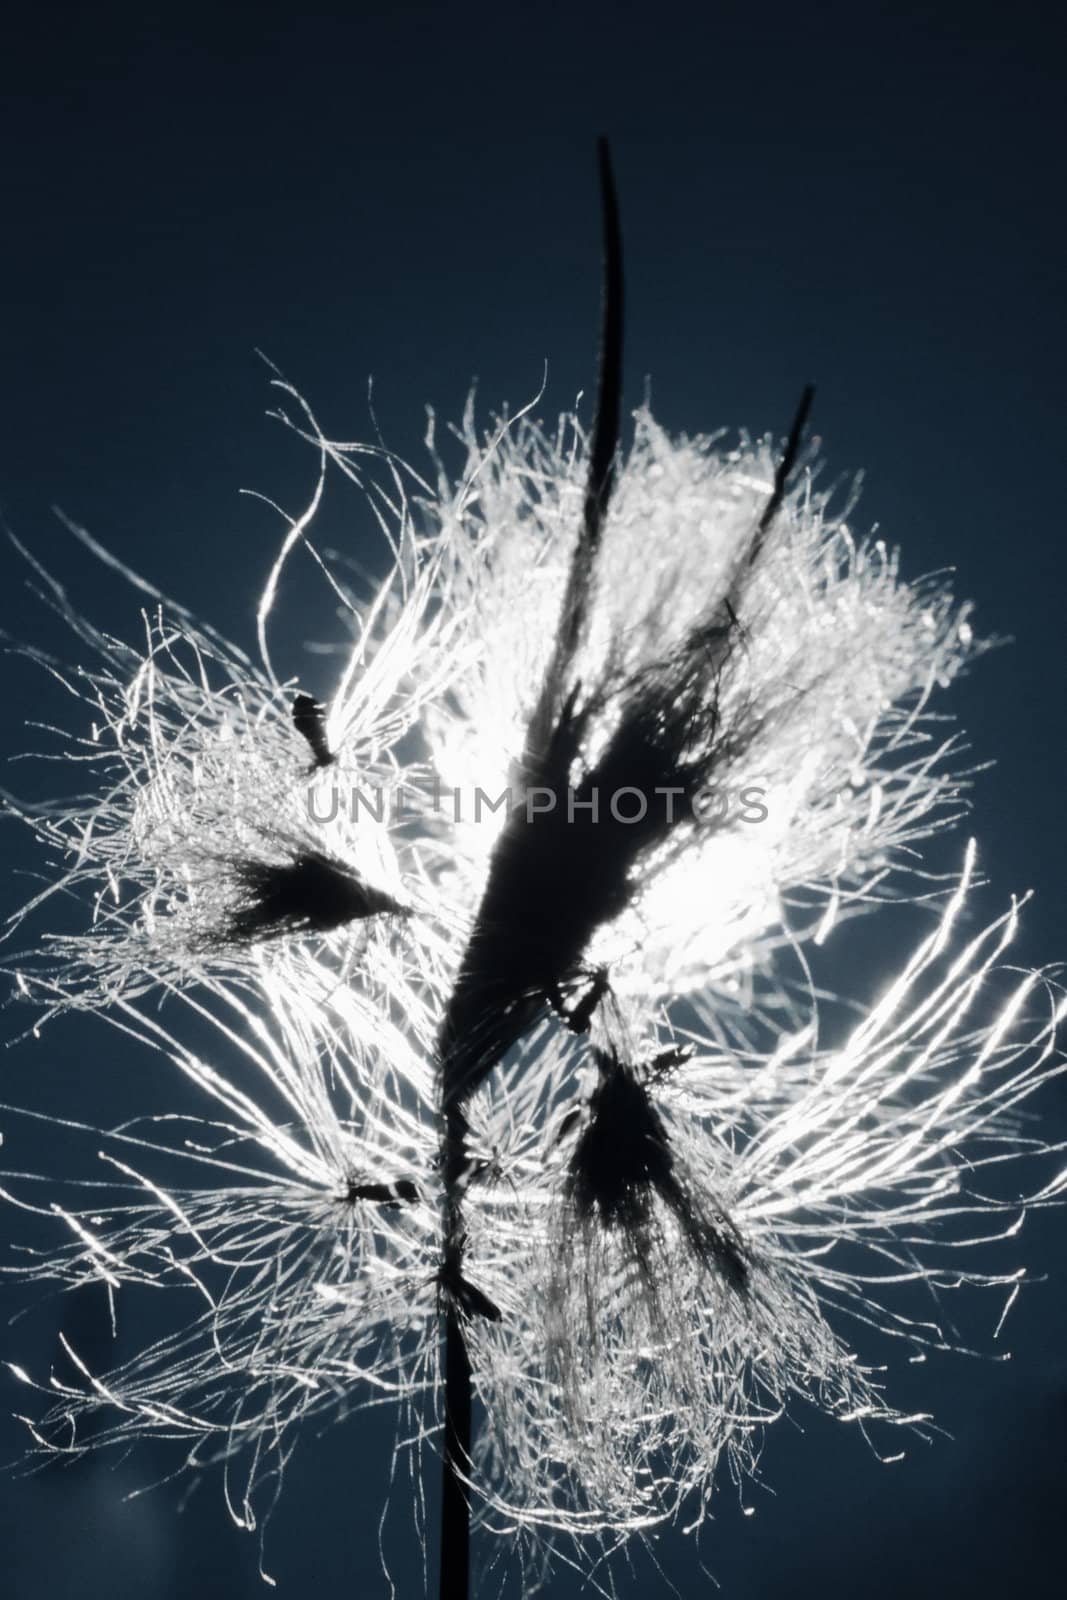 Hairy seeds of Pasque Flower (Pulsatilla patens) in extreme backlit close-up.